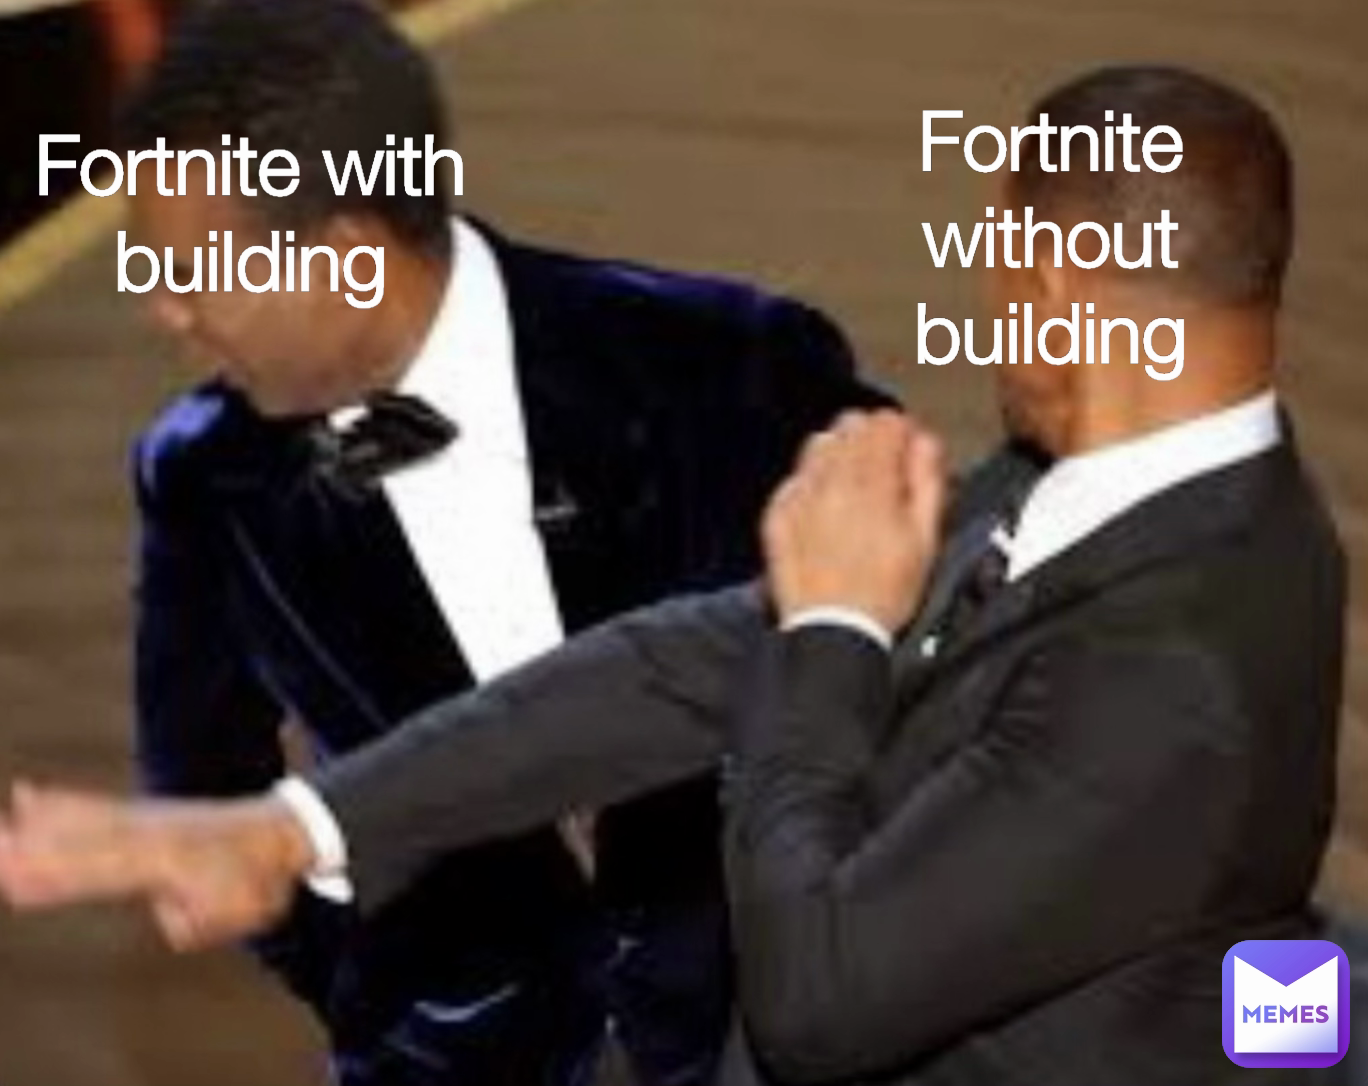 Fortnite without building Fortnite with building